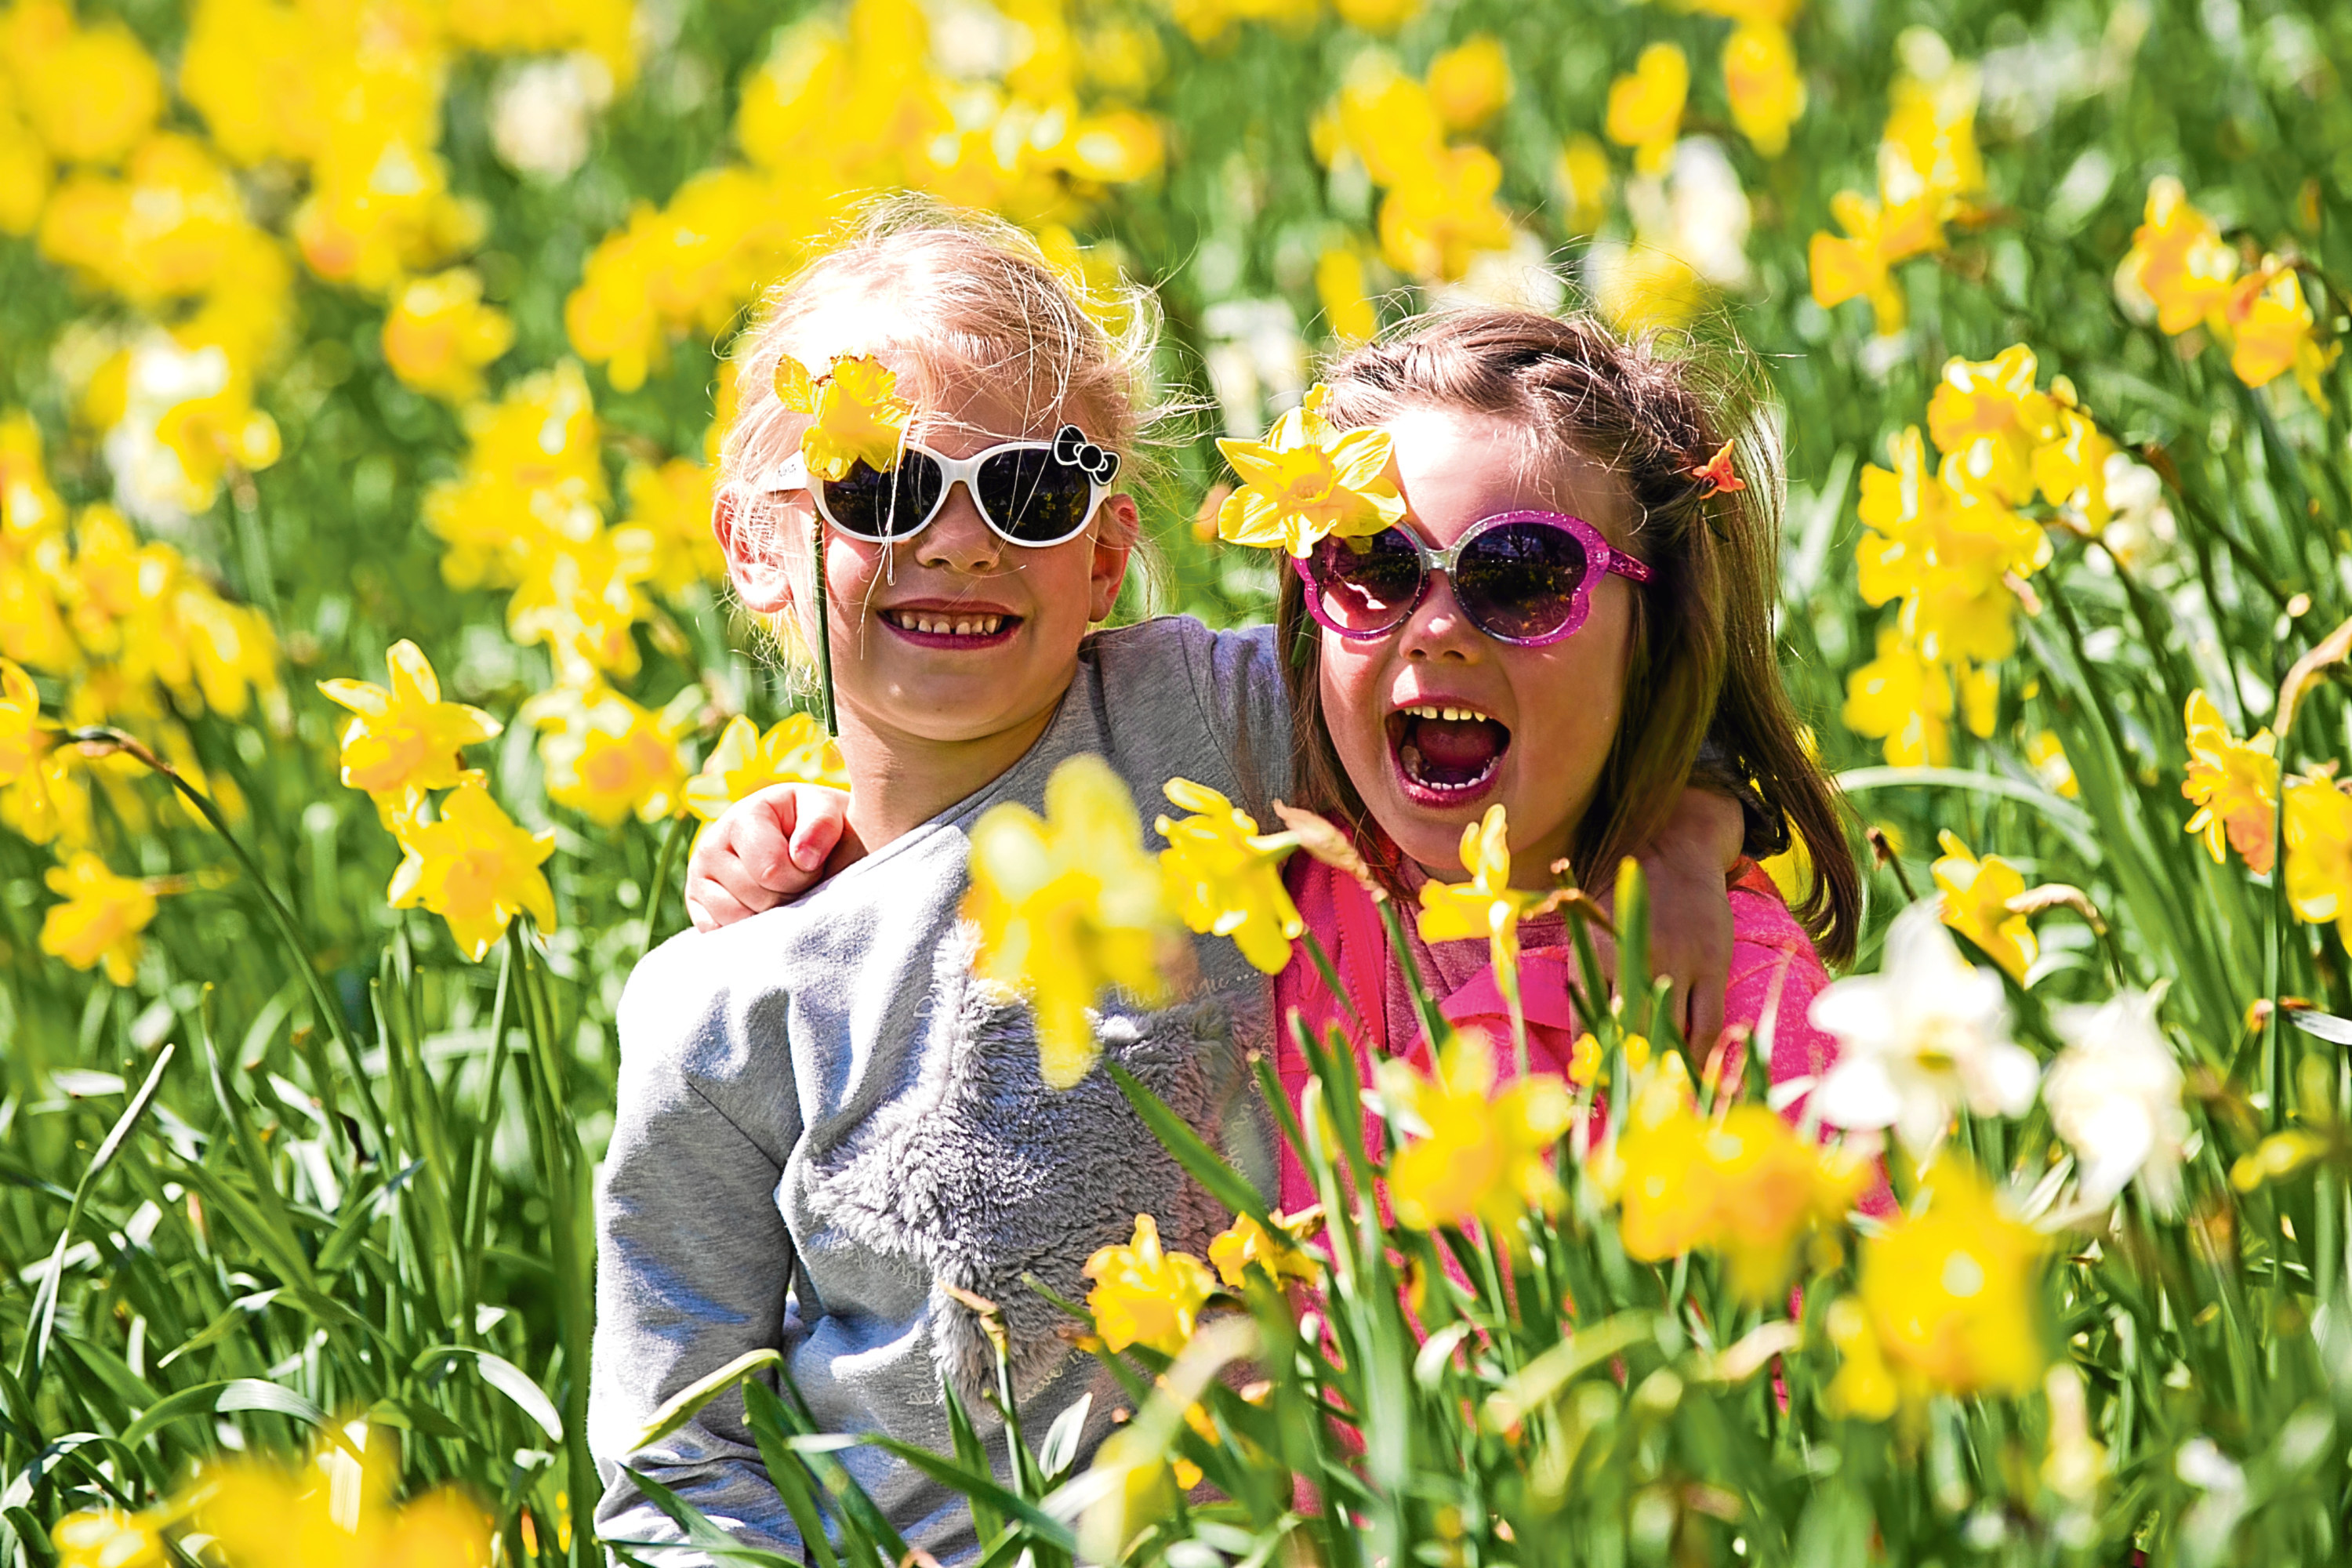 Nela (5) and Hanna (4) from Edinburgh, enjoying the sun in Linlithgow (Andrew Cawley / DC Thomson)